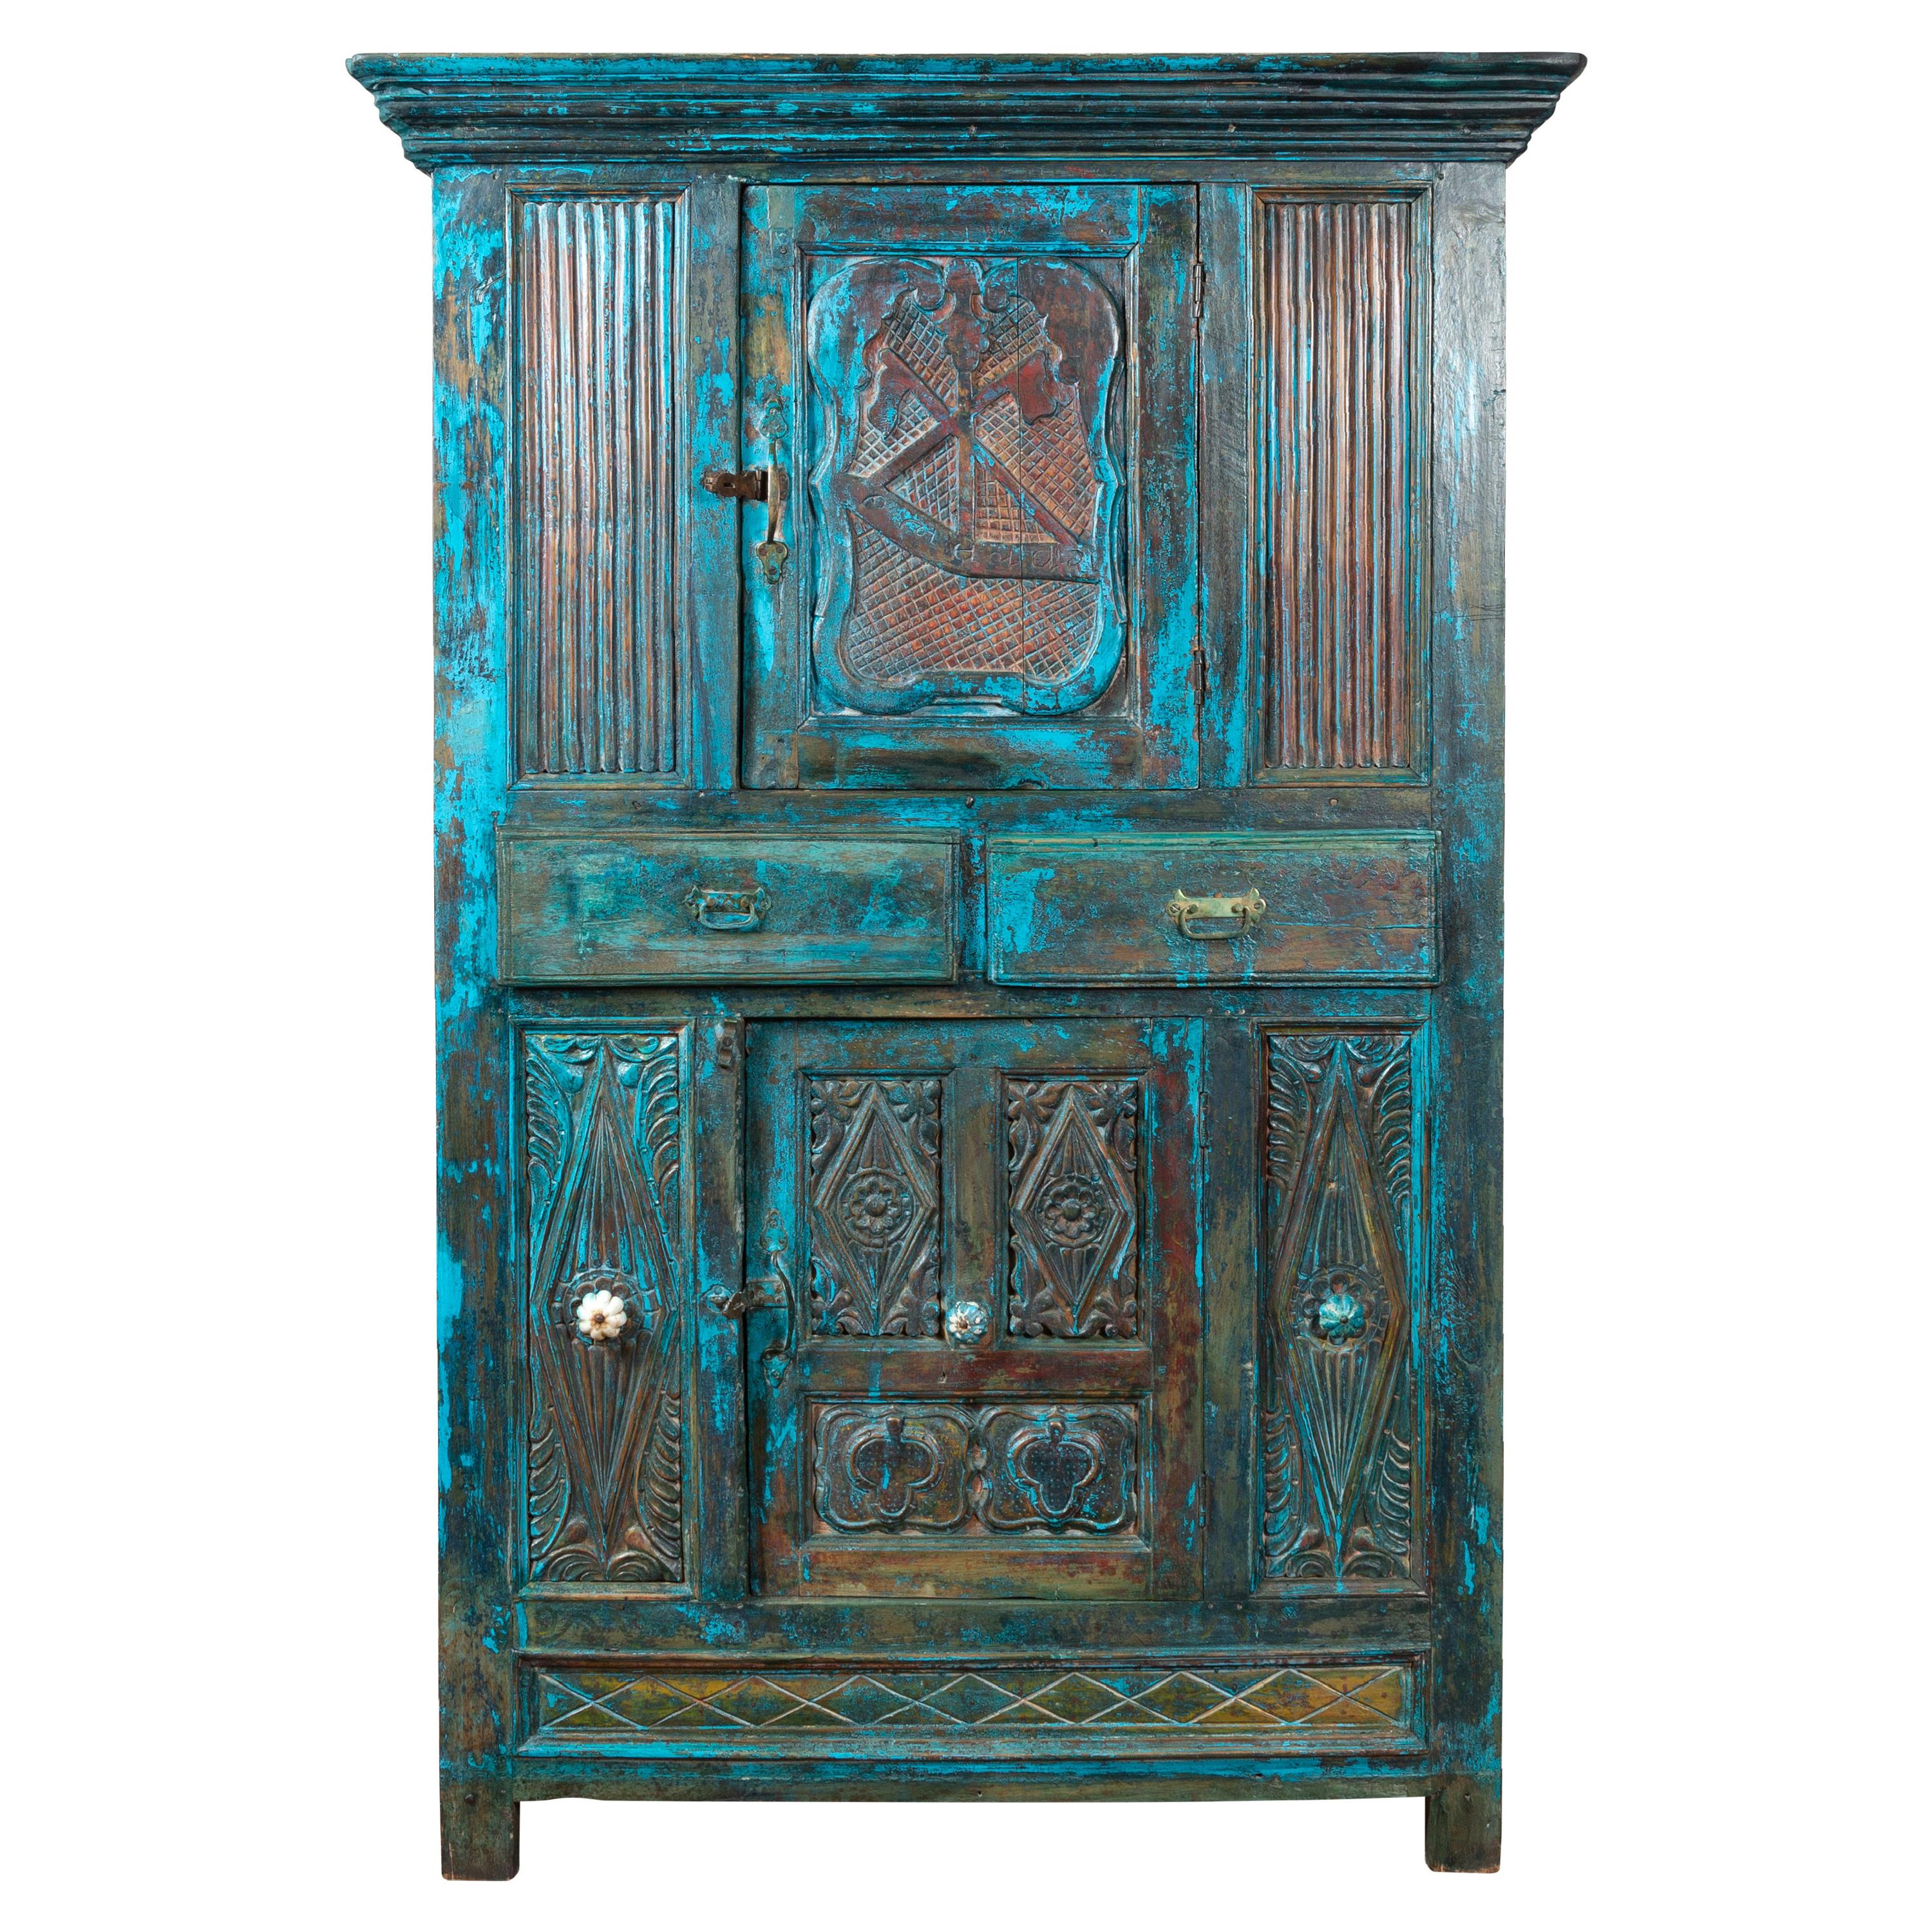 Indian 19th Century Royal Teal Painted Cabinet with Carved Doors and Two Drawers